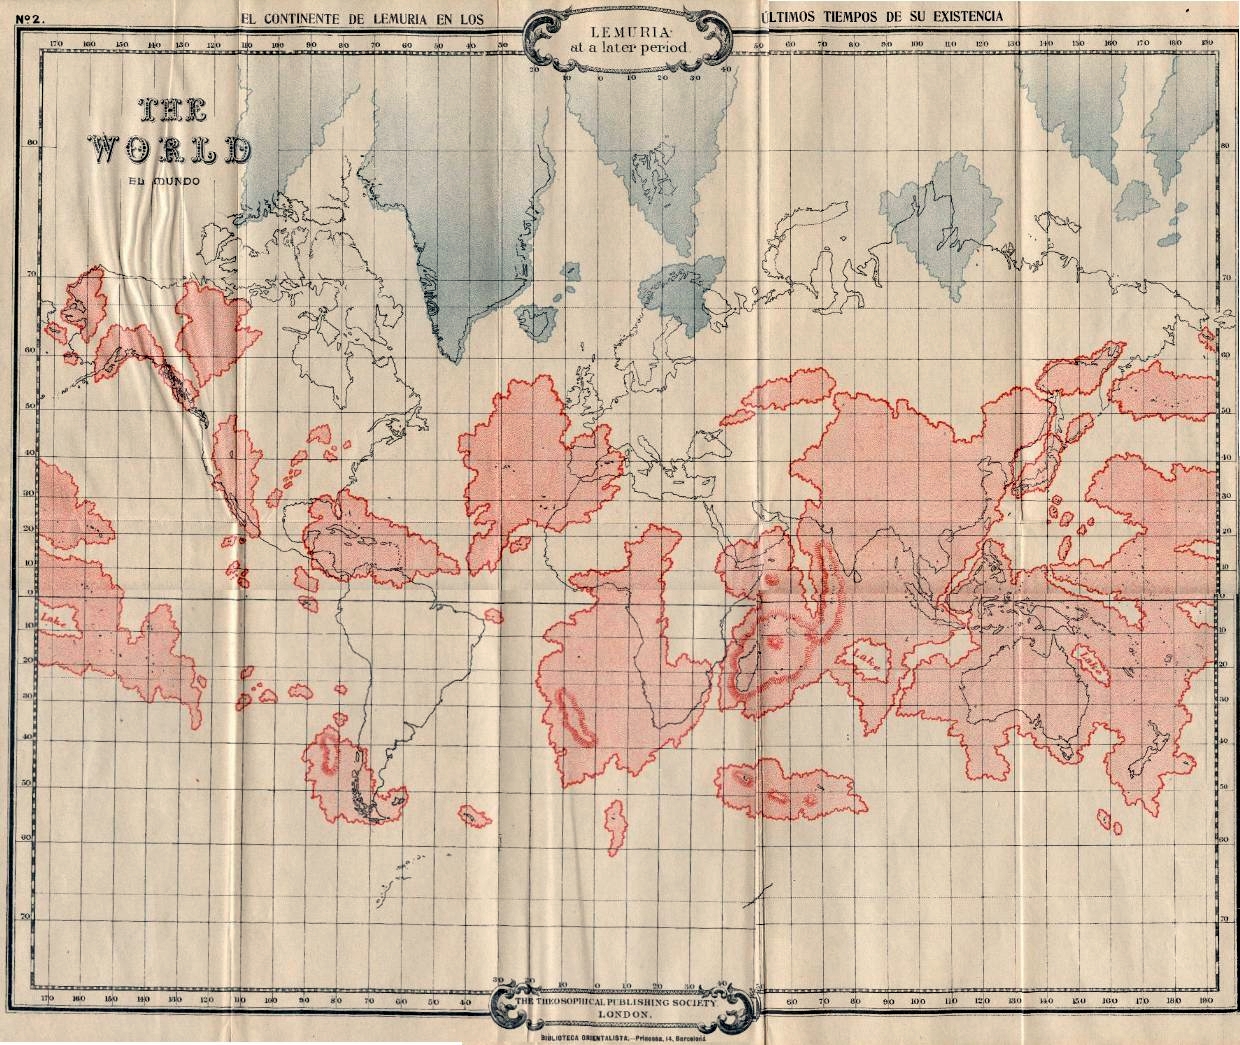 Old map of the world with red lines.